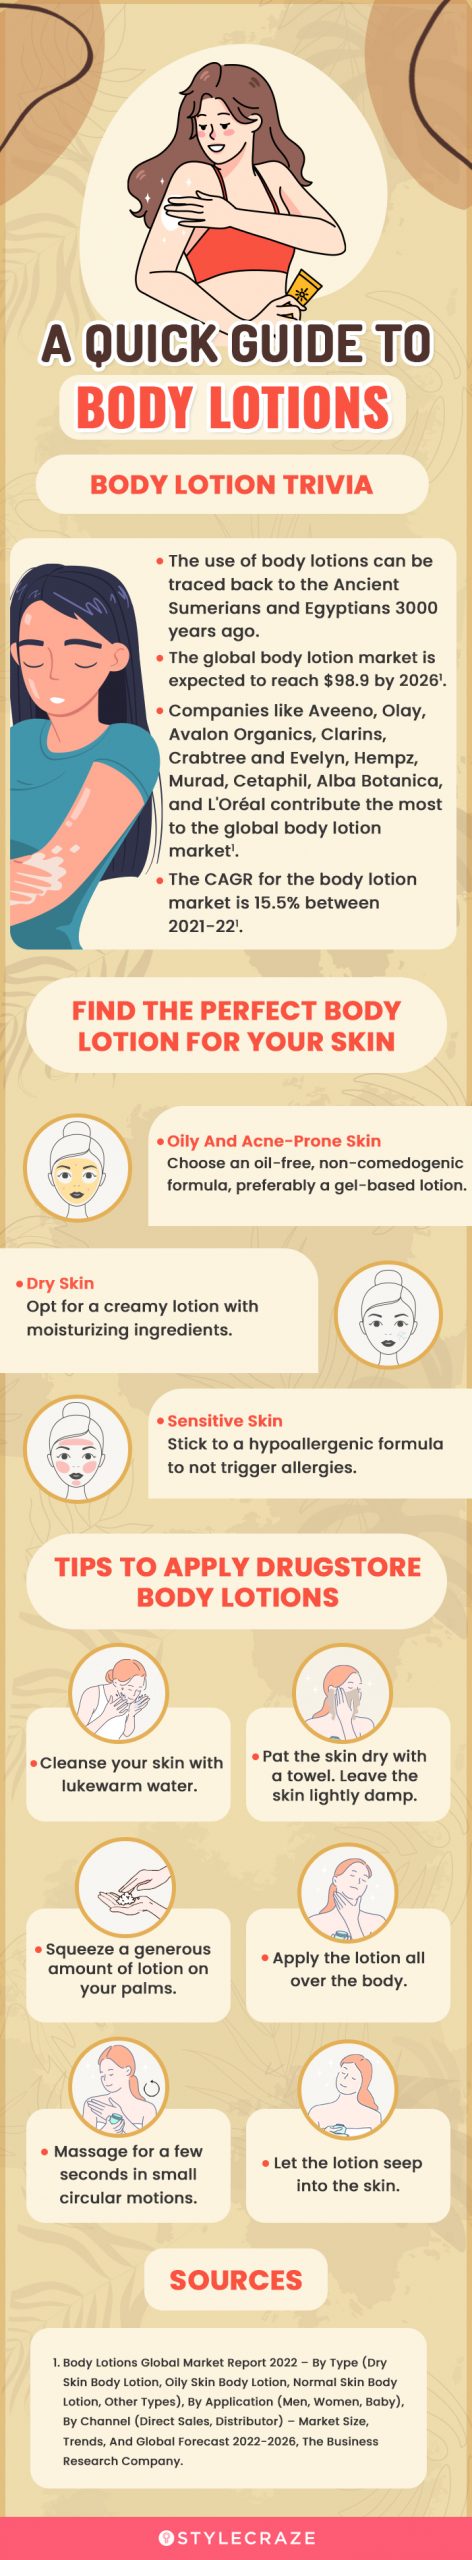 A Quick Guide To Body Lotions (infographic)